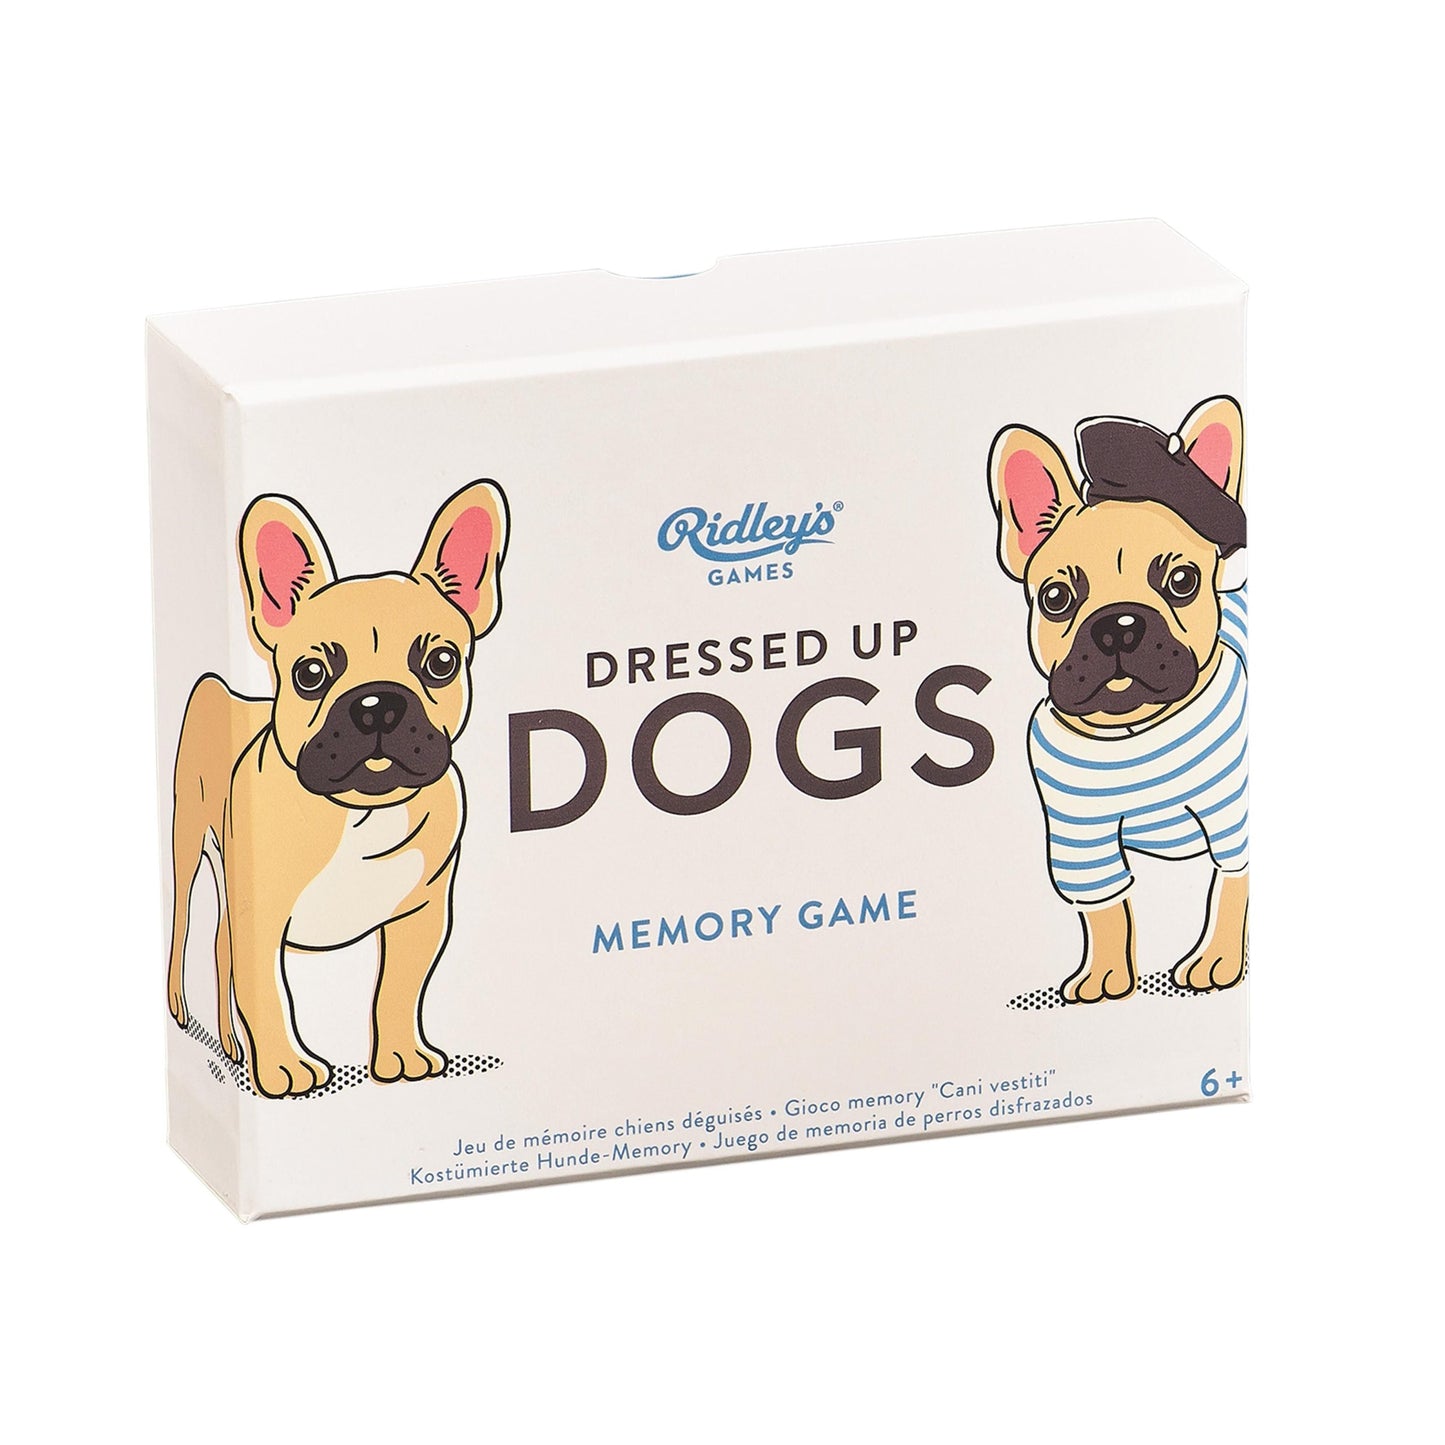 Dressed Up Dogs & Costumed Cats Memory Games